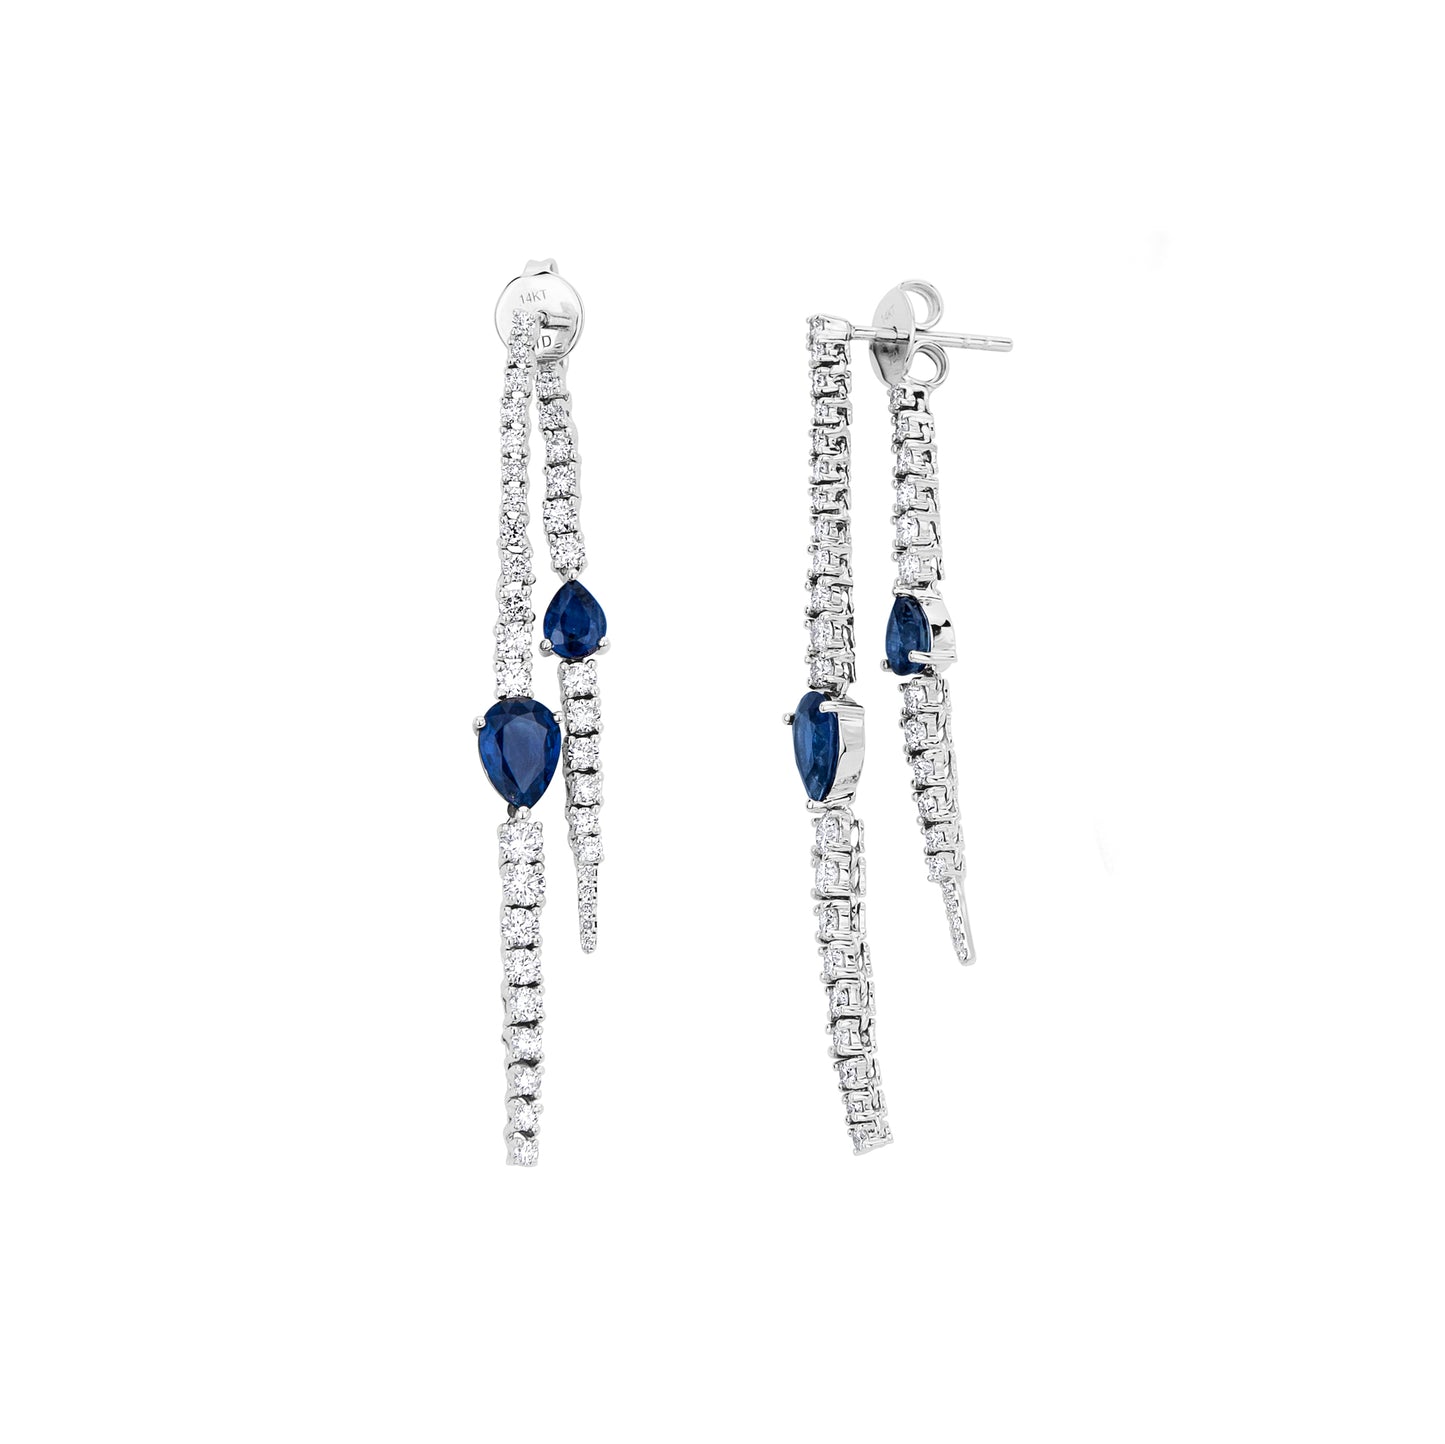 Load image into Gallery viewer, Double Hanging Diamond Earrings with Blue Sapphire Pears
